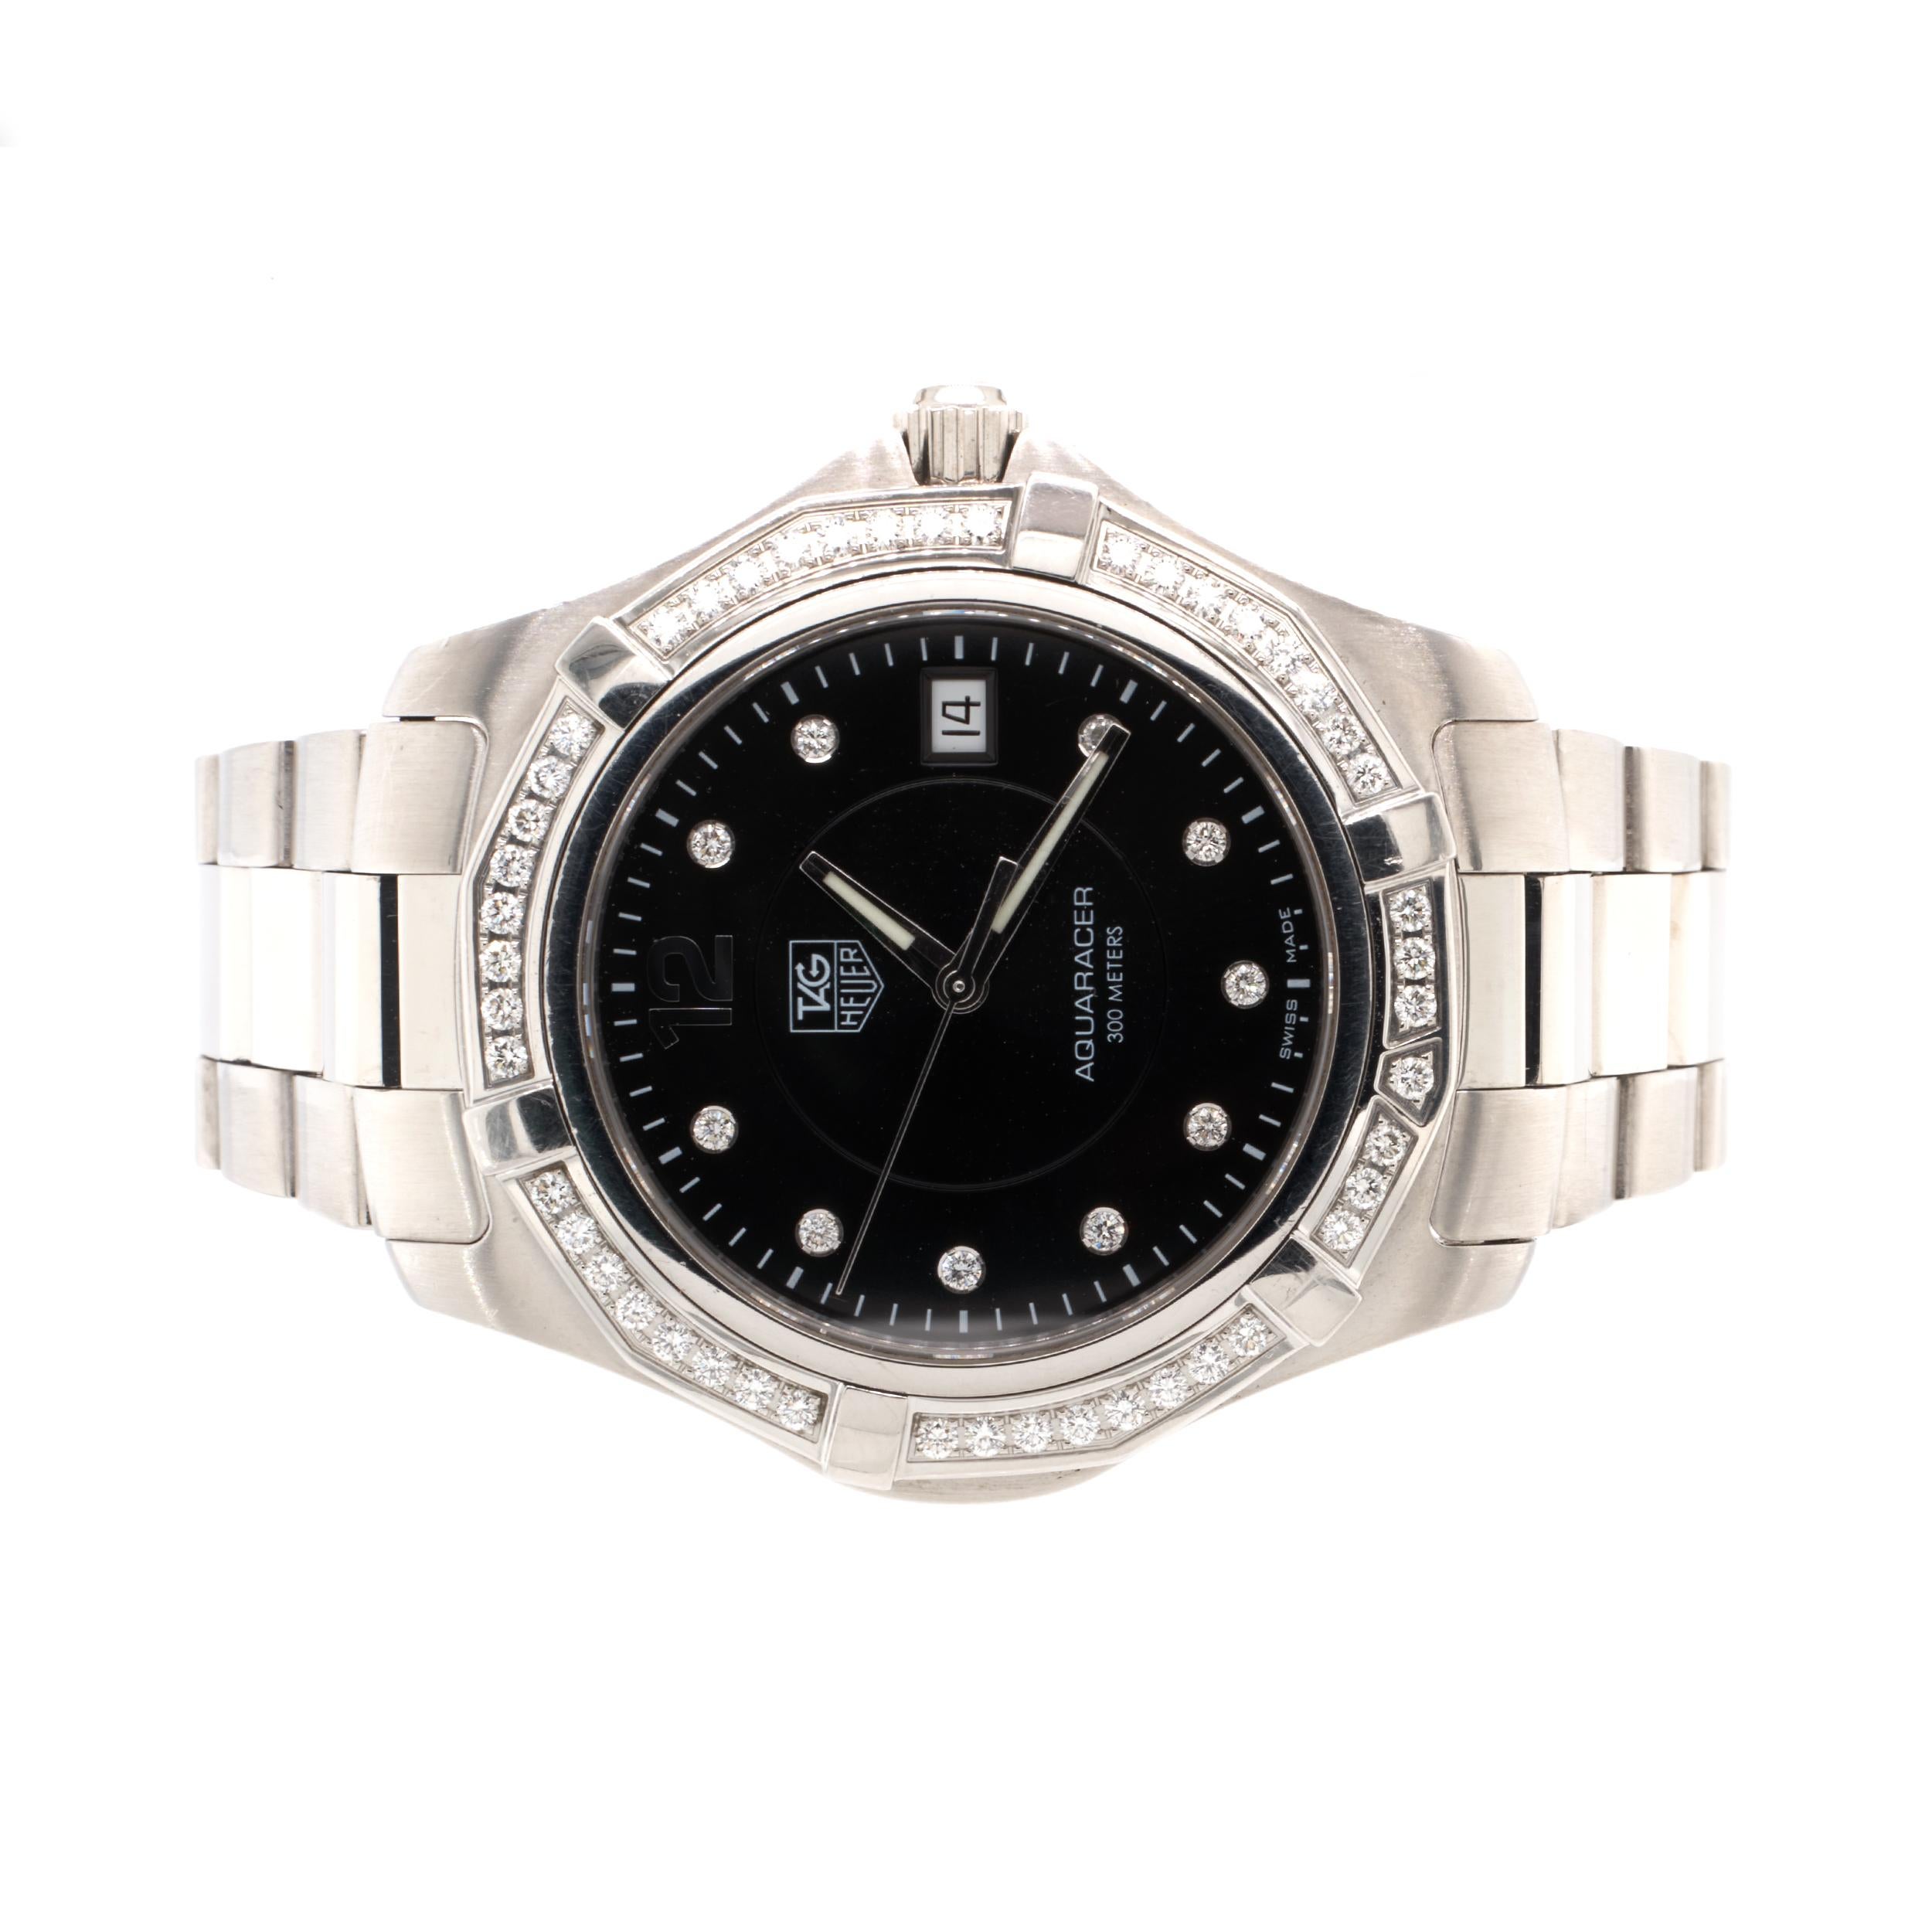 Movement: quartz
Function: hours, minuets, seconds, date
Case: 39mm stainless steel round case, diamond bezel,  pull push crown, sapphire crystal
Dial: black dial, diamond hour markers, steel hands, date at 3 o’clock
Band: Tag Heuer stainless steel